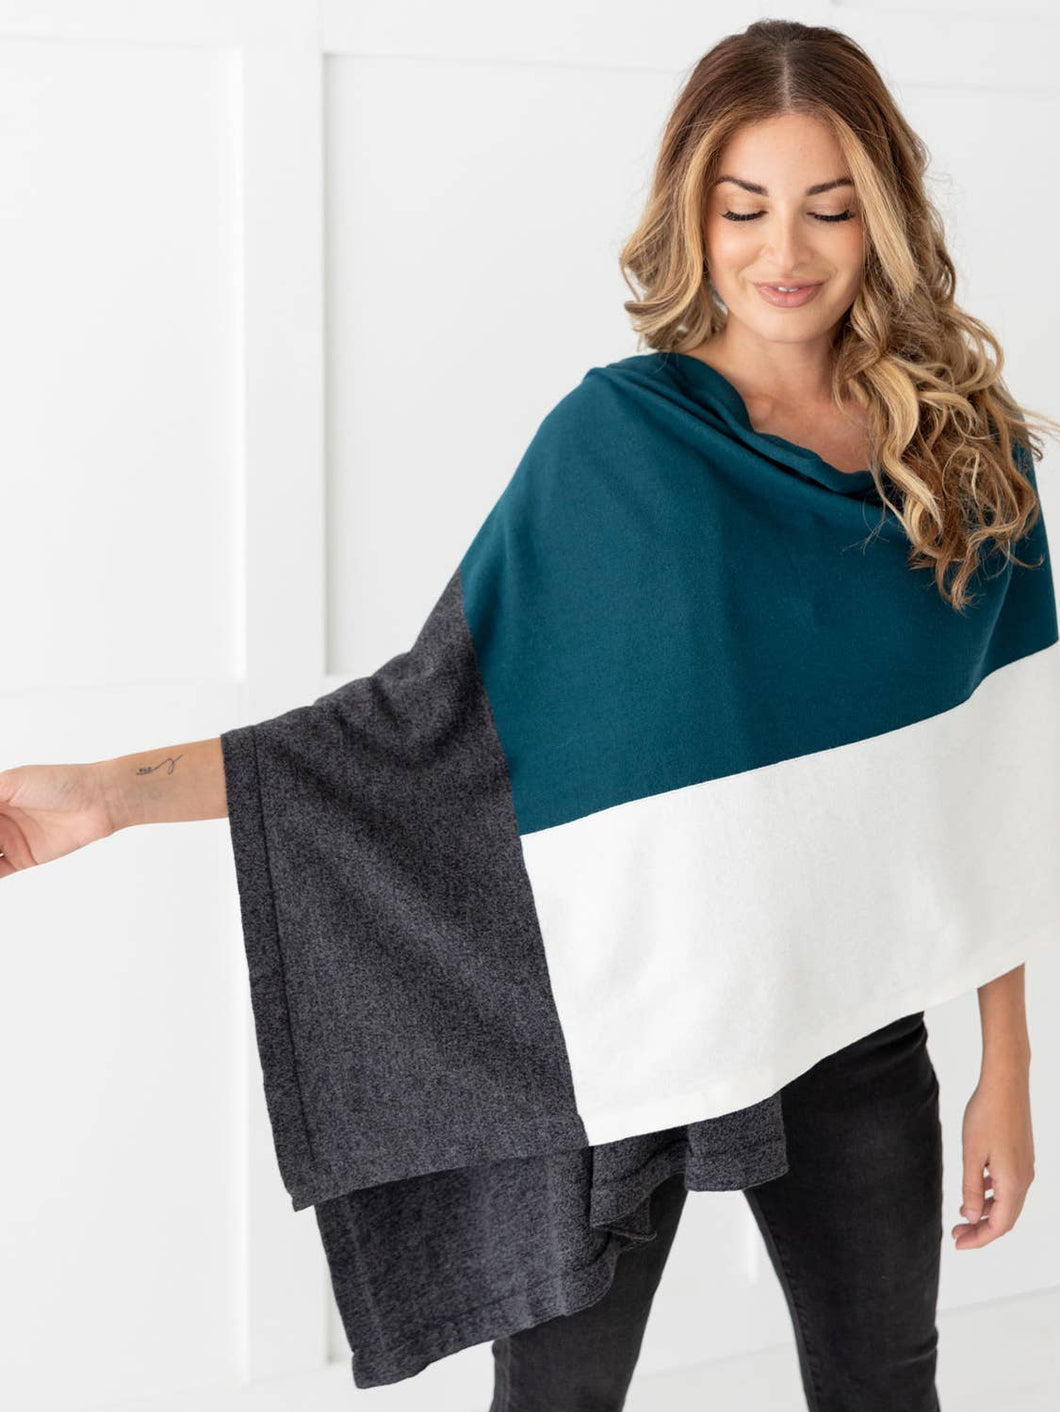 The Dreamsoft Travel Scarf - Teal Colorblock